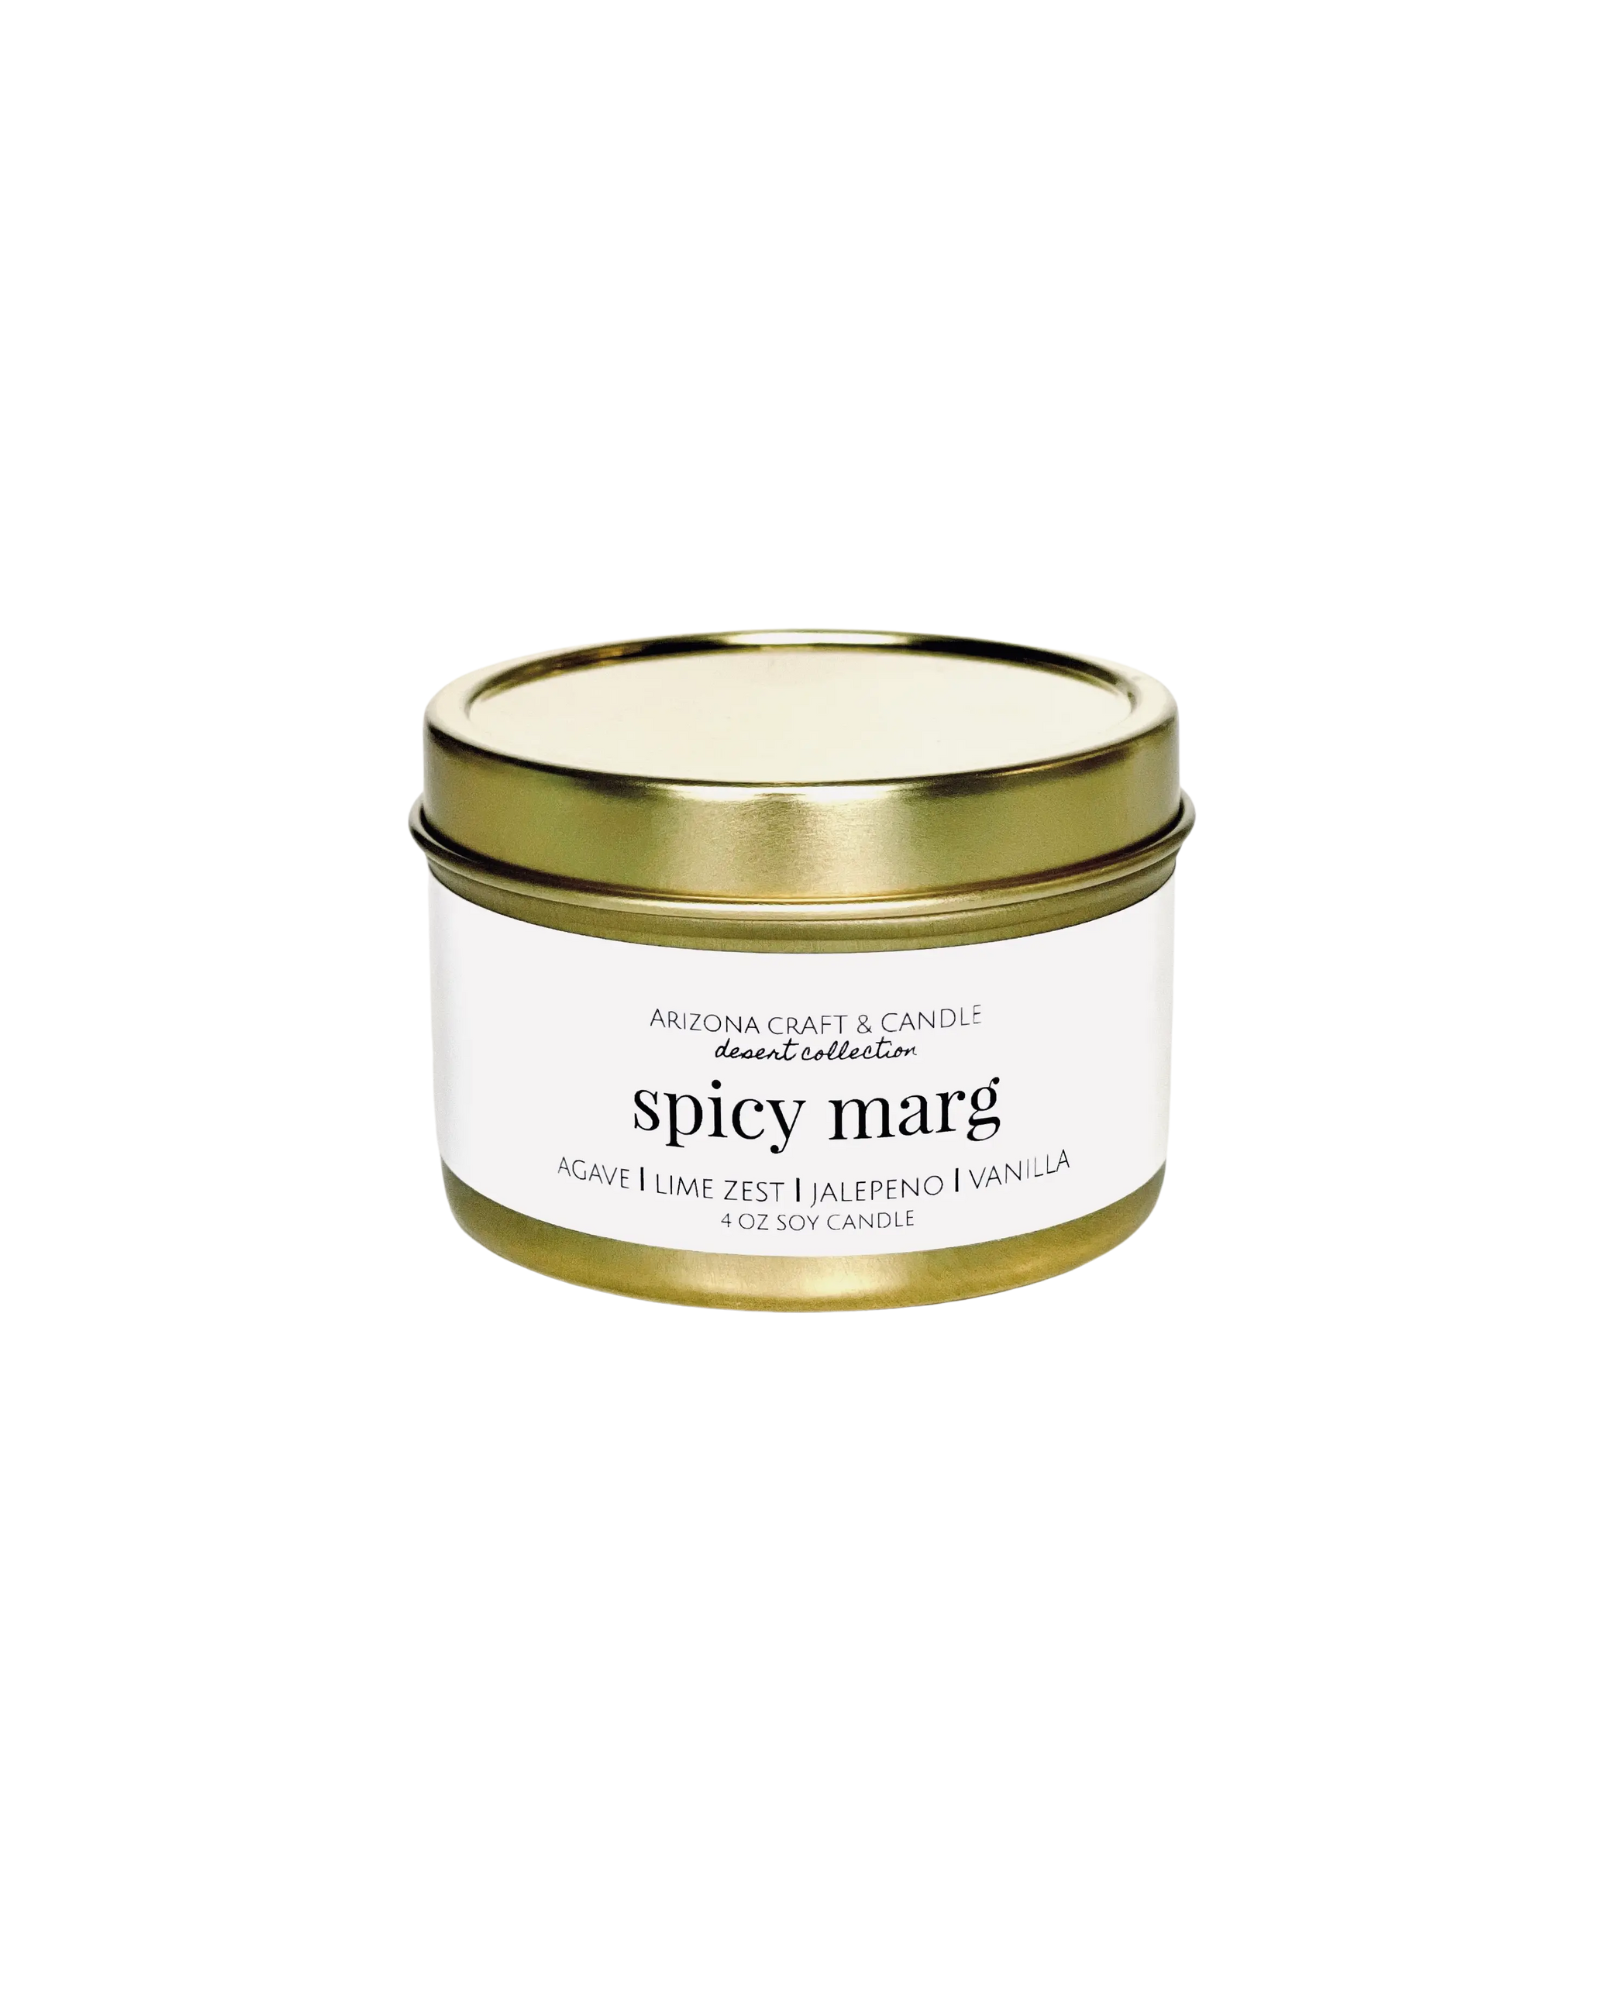 Spicy marg gold travel candle with white label